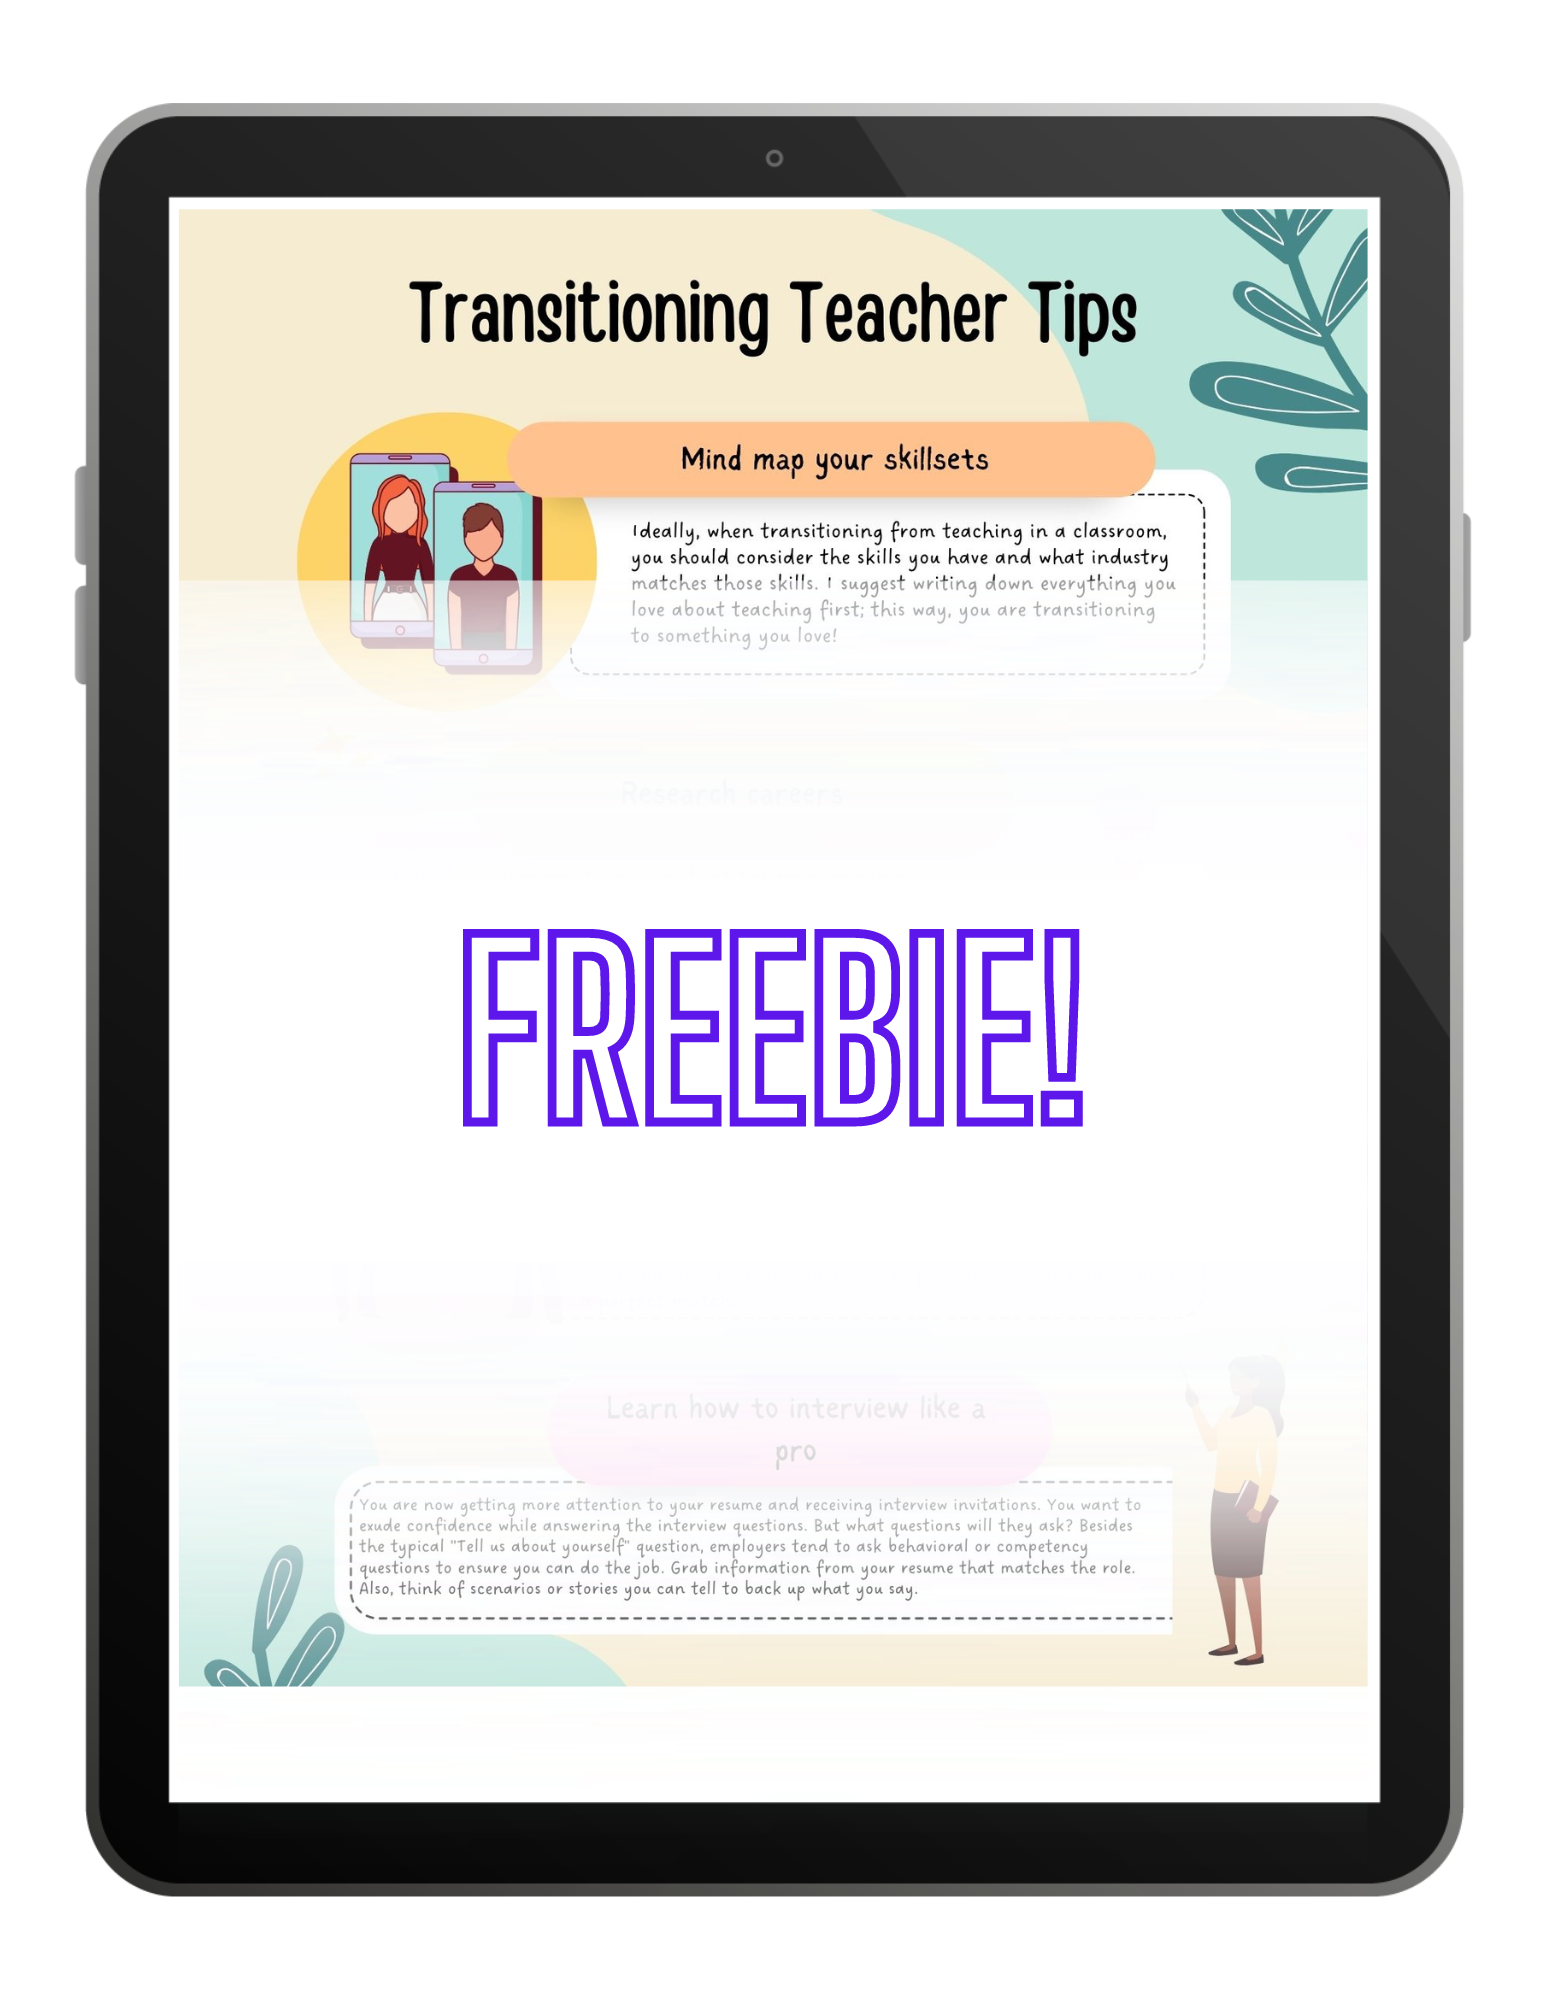 Tips for Transitioning Teachers - Freebie!